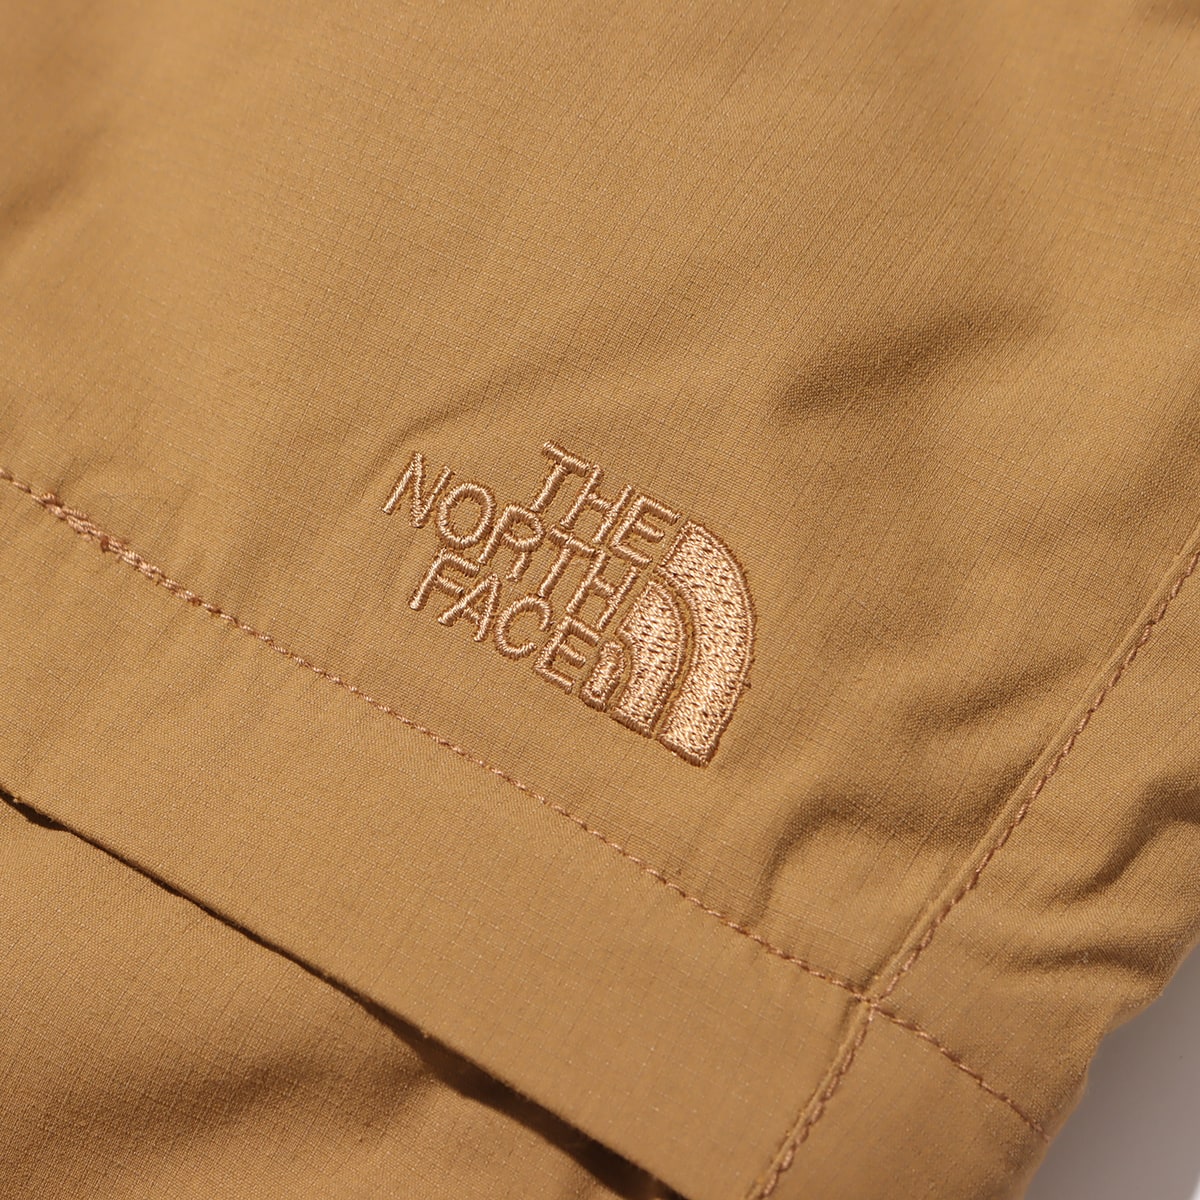 THE NORTH FACE Firefly Insulated PANT Uブラウン - ブラウン - L